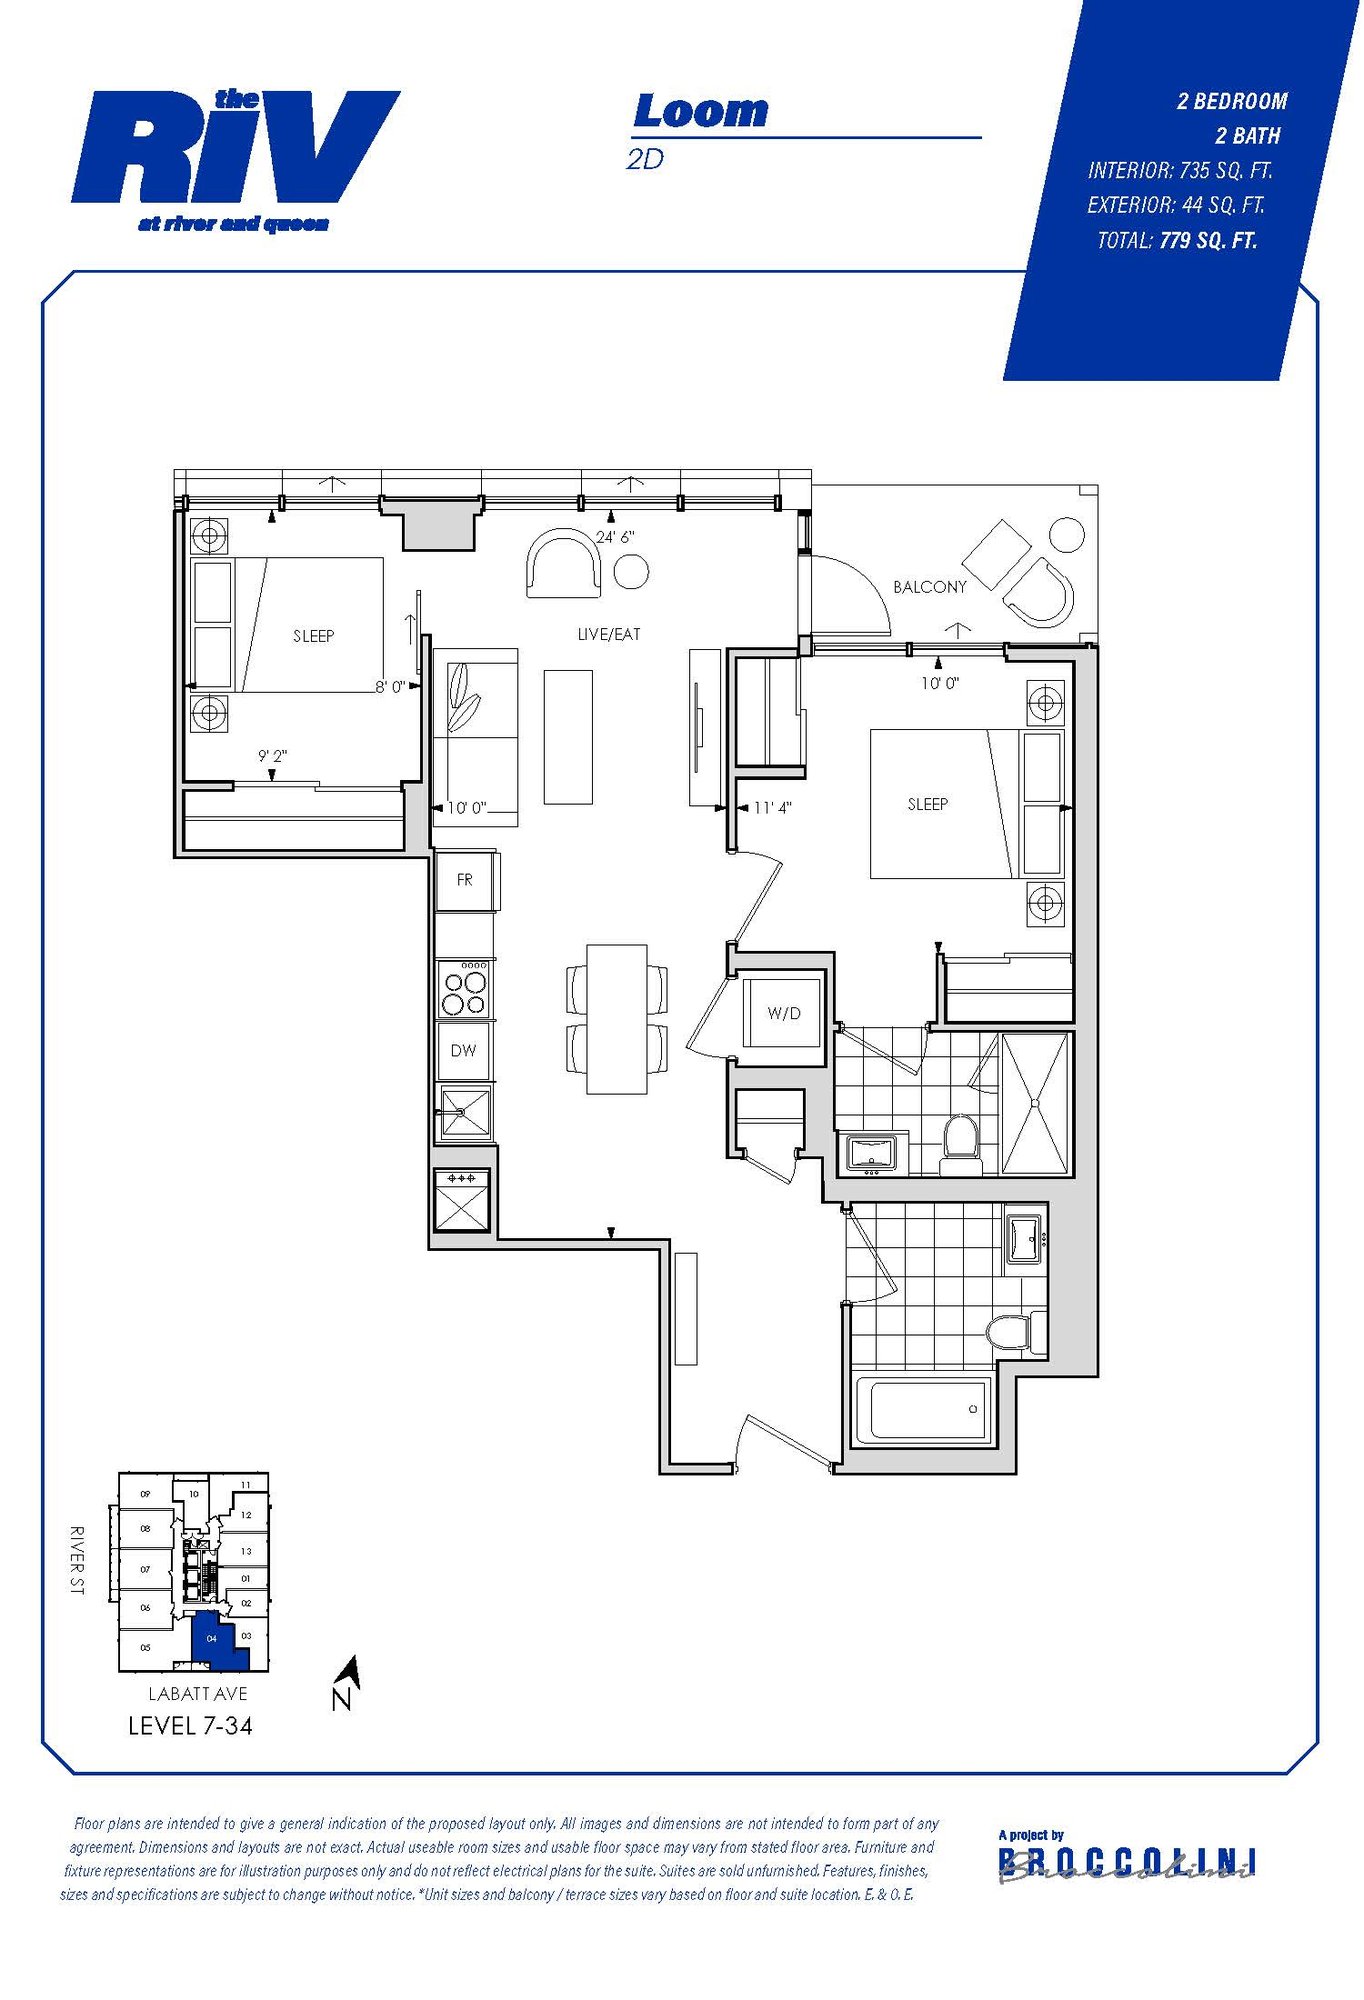 Floor plan for Loom two bedroom unit in The Riv